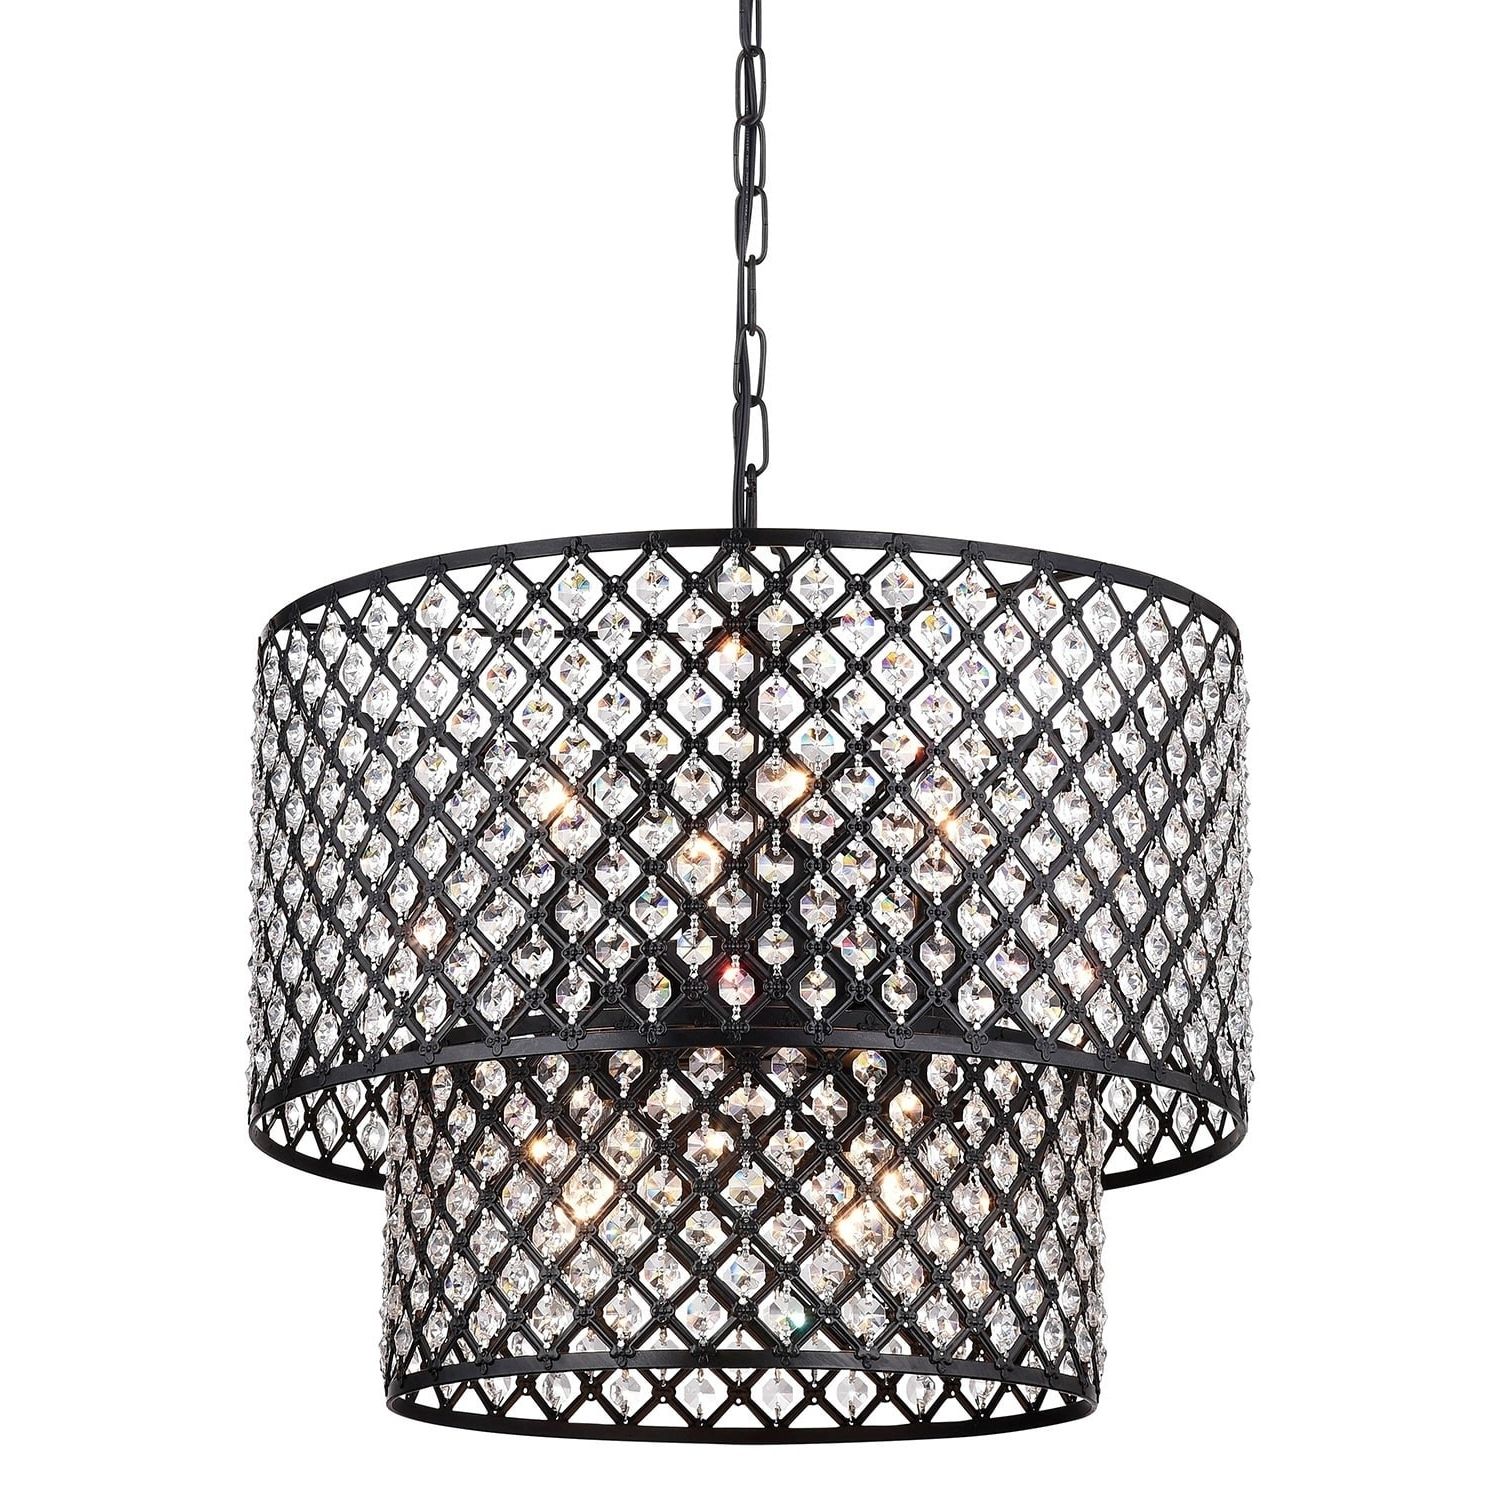 Steel Eight Light Chandeliers With Well Liked Shop Aenna Multicolored Metal 2 Tier 8 Light Drum (View 5 of 20)